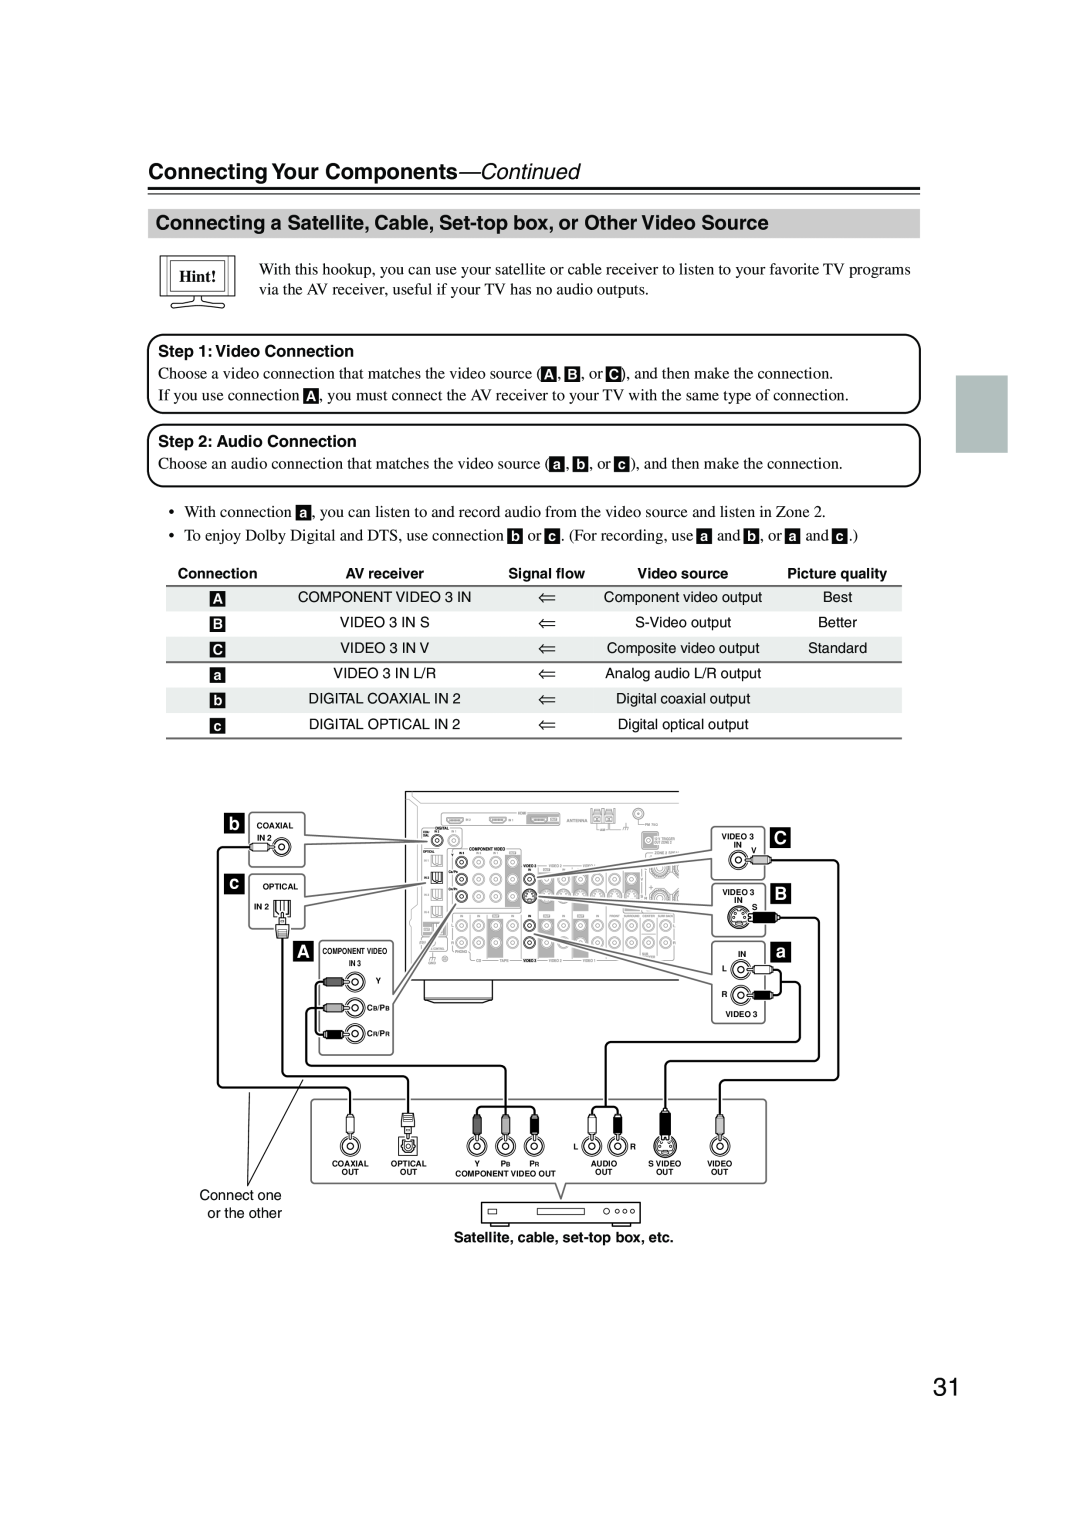 Onkyo SR804 instruction manual Connecting Your Components—Continued, C B a, Hint, Satellite, cable, set-topbox, etc 